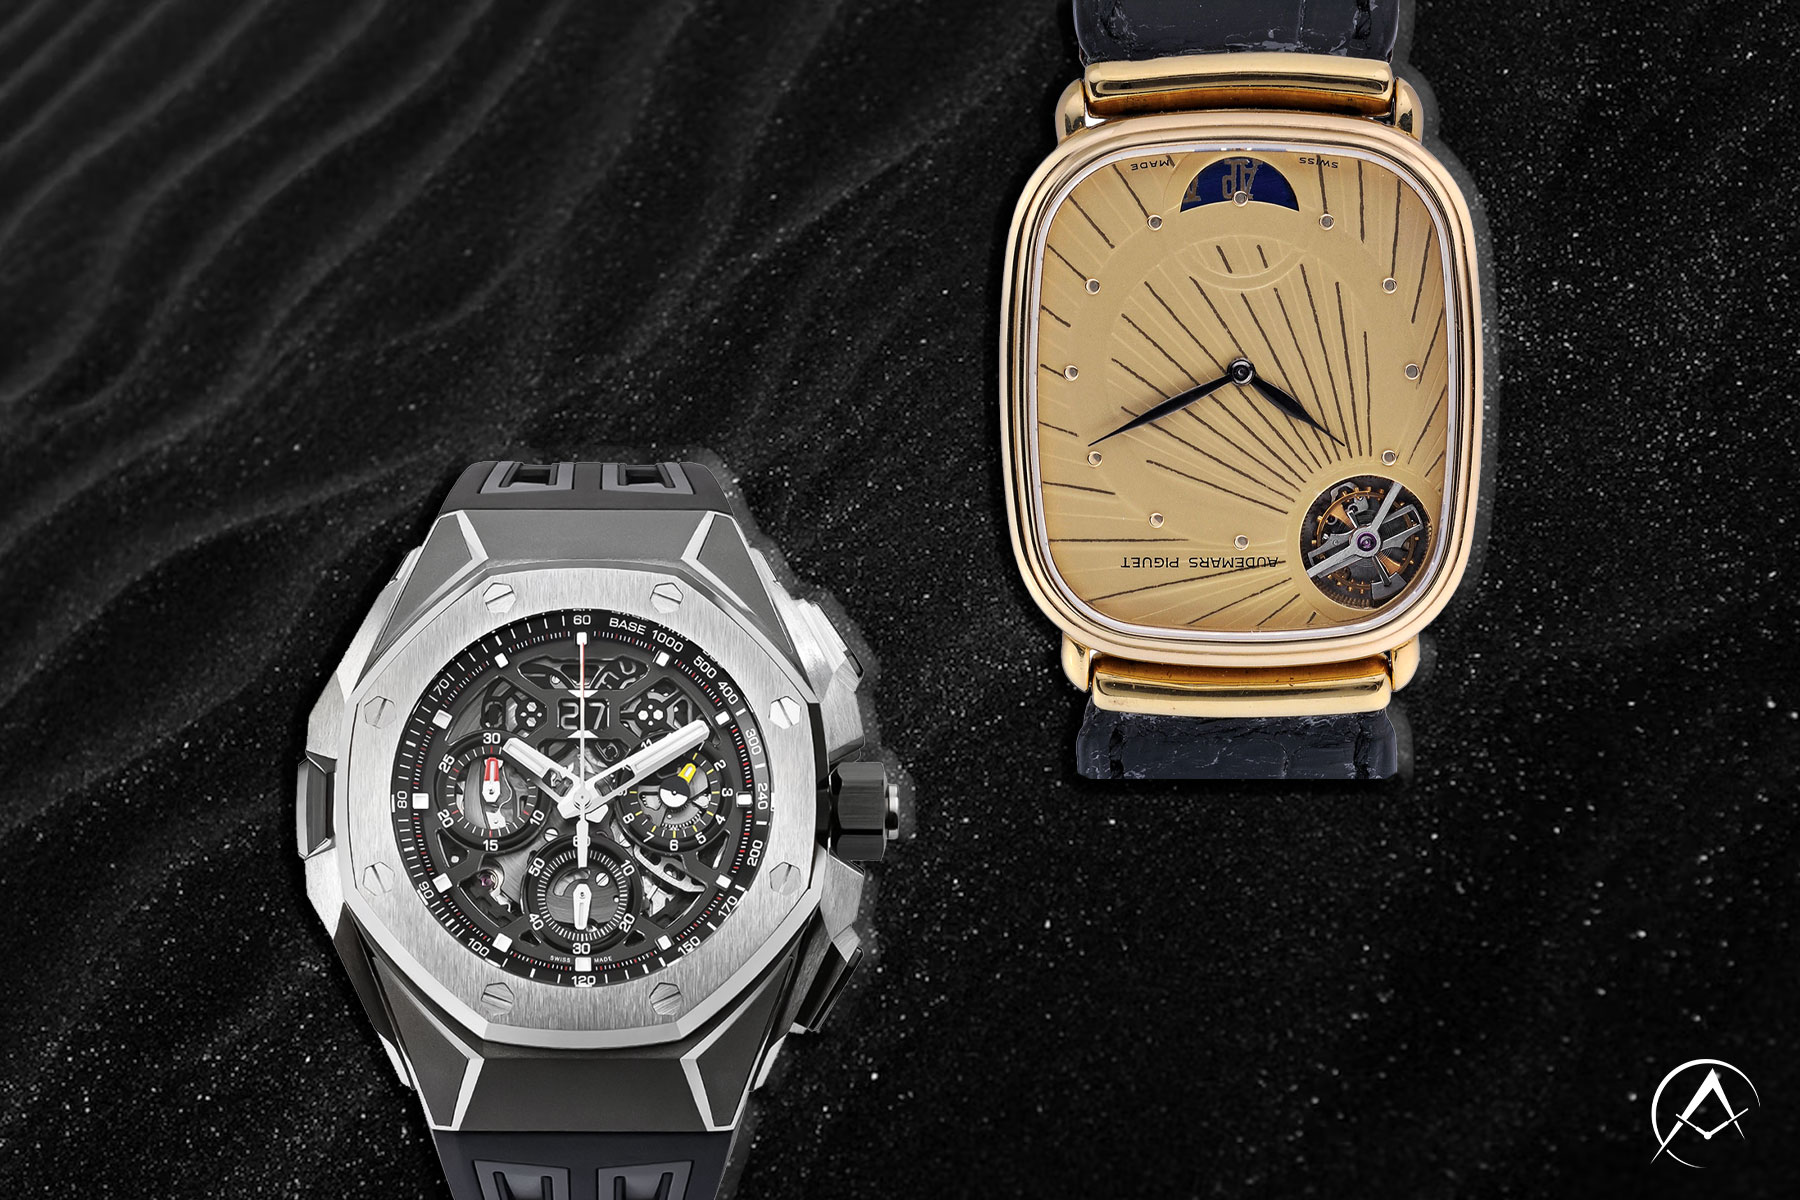 Two Audemars Piguet Timepieces, one with a Gold Dial and the Other a Skeleton Dial on a Black Sandy Background.